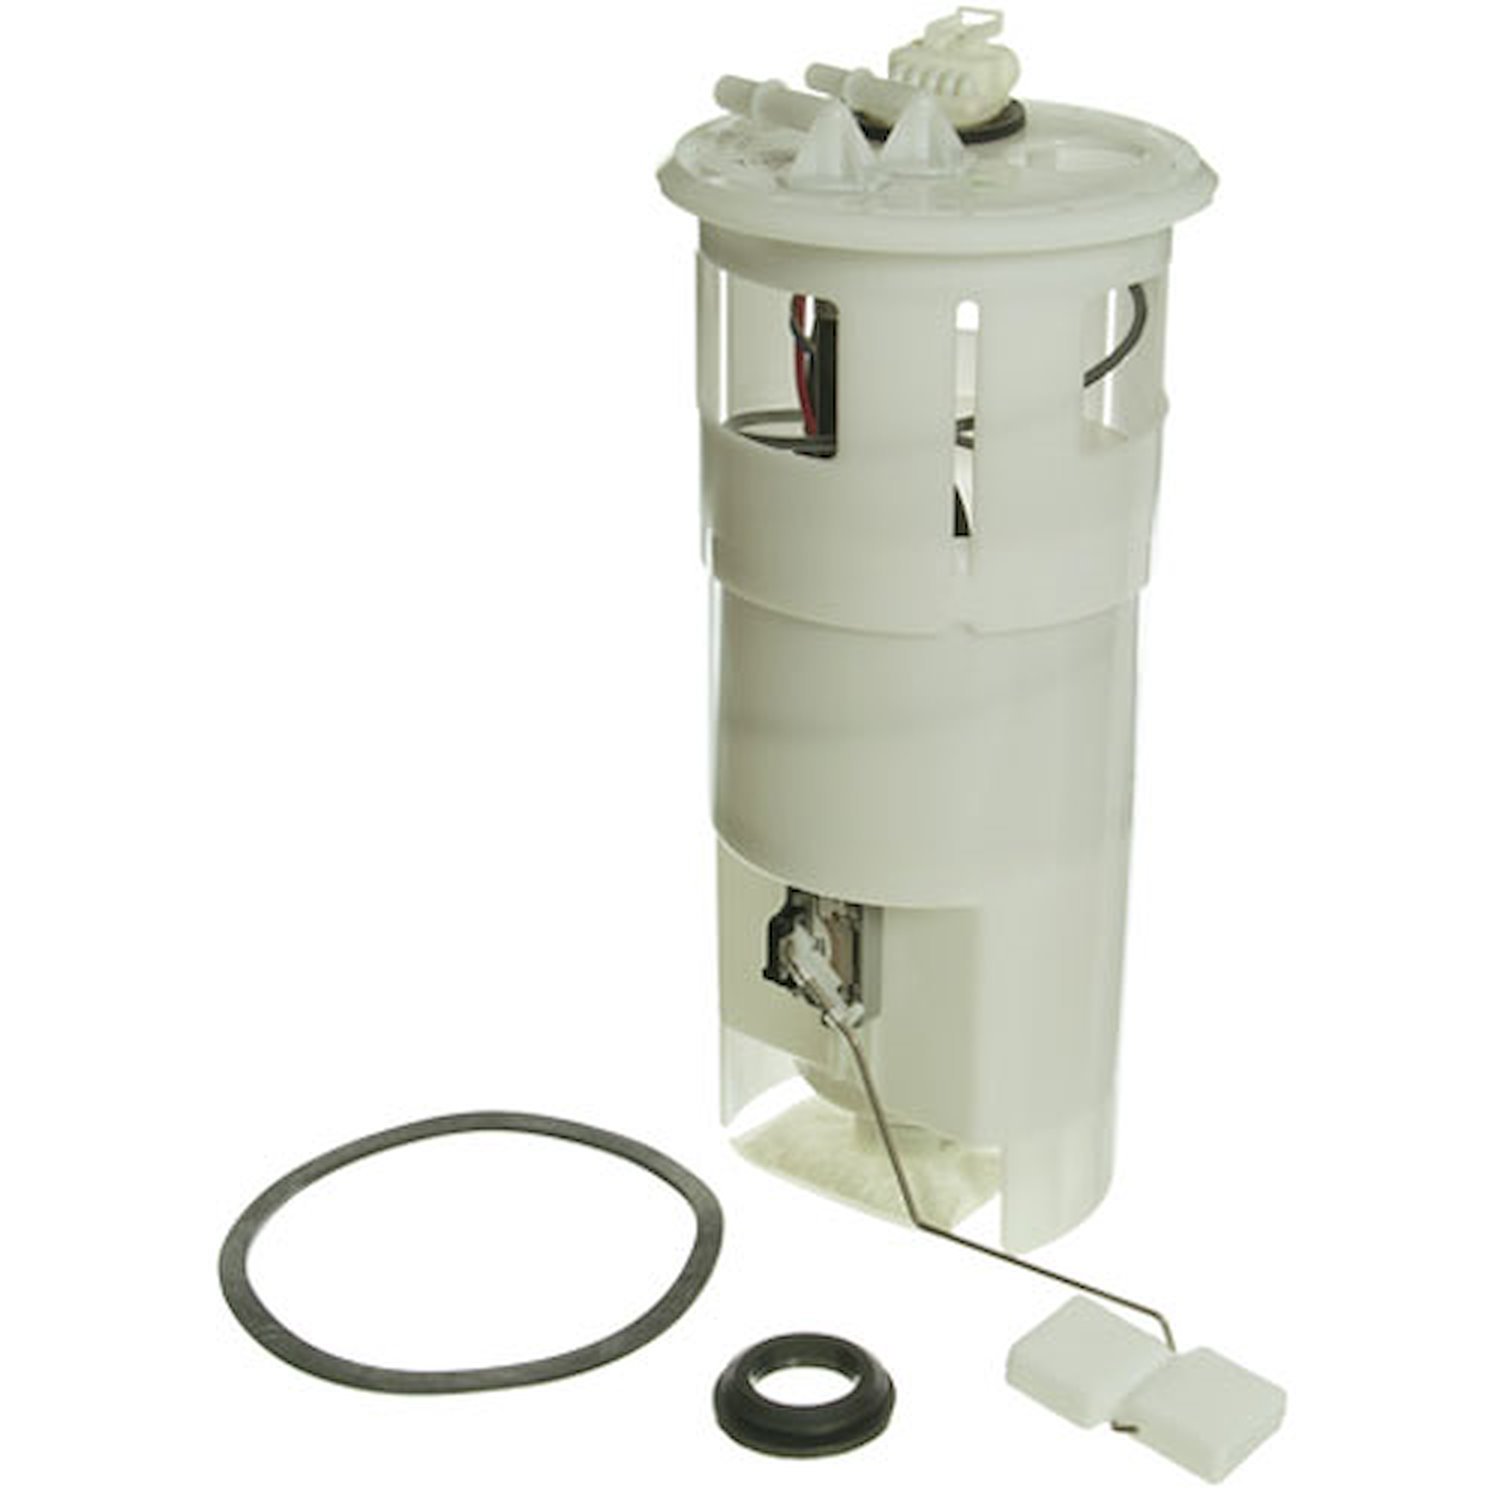 OE Chrysler/Dodge Replacement Electric Fuel Pump Module Assembly 1993-95 Chrysler Concorde/LHS/New Yorker 3.3L/3.5L V6